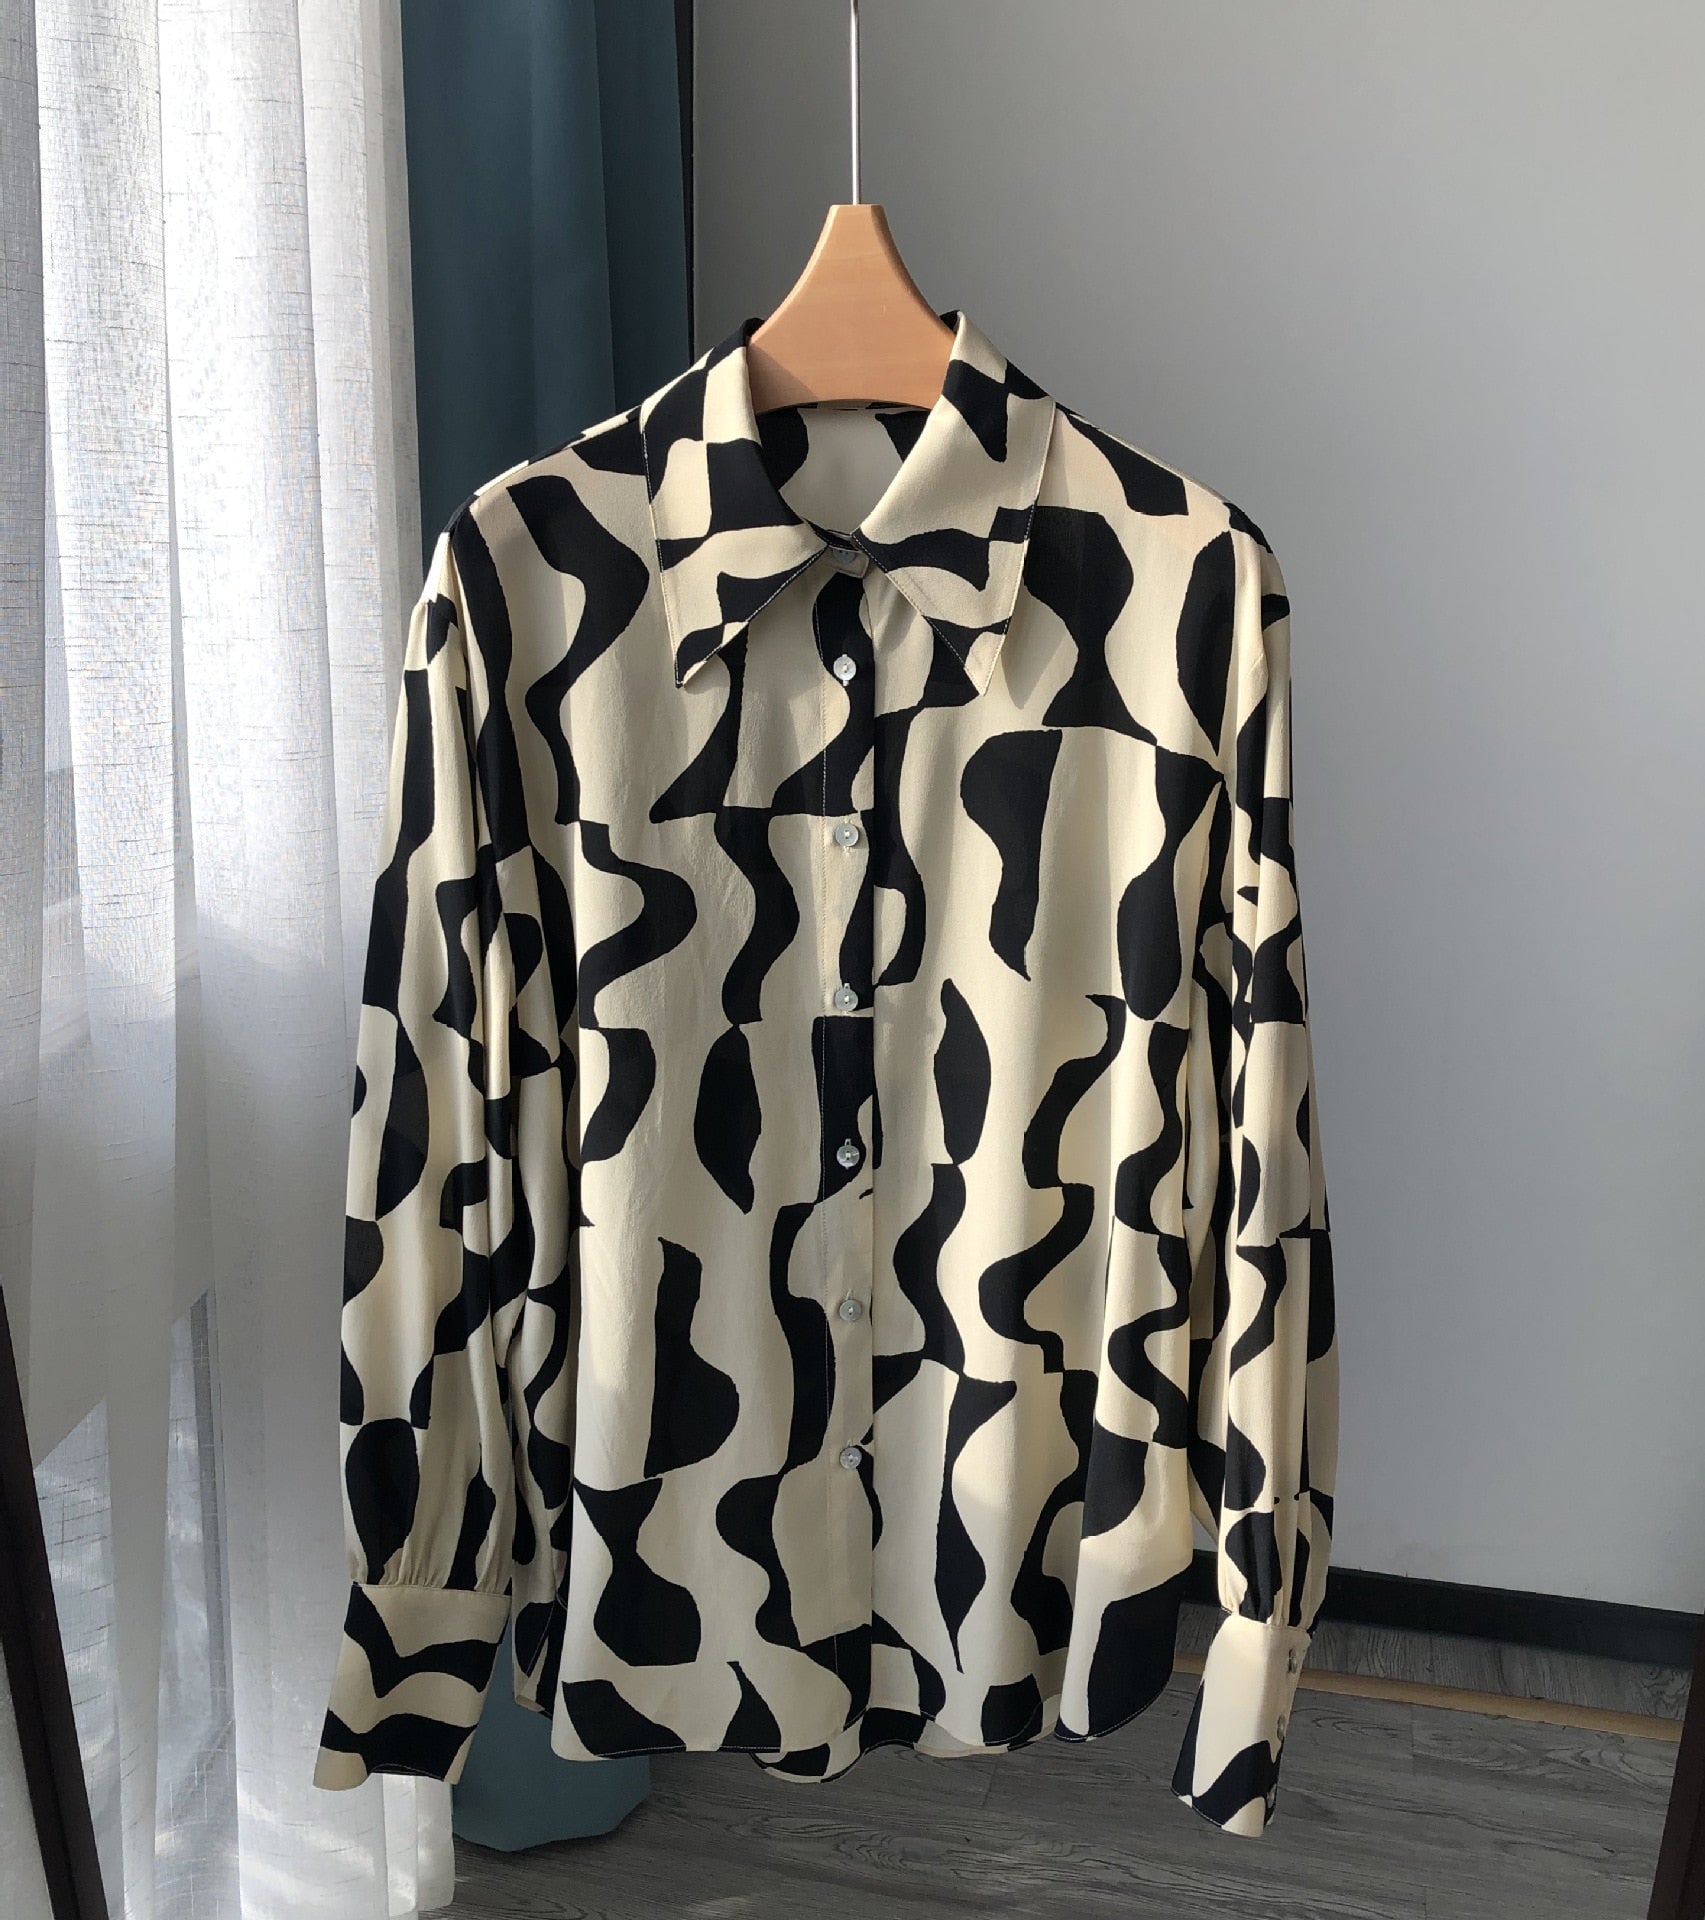 Clacive 100% Slick Women Shirt  Spring/Summer Abstract Geometric Wave Beige Contrasting Color Silk Long Sleeve Shirt